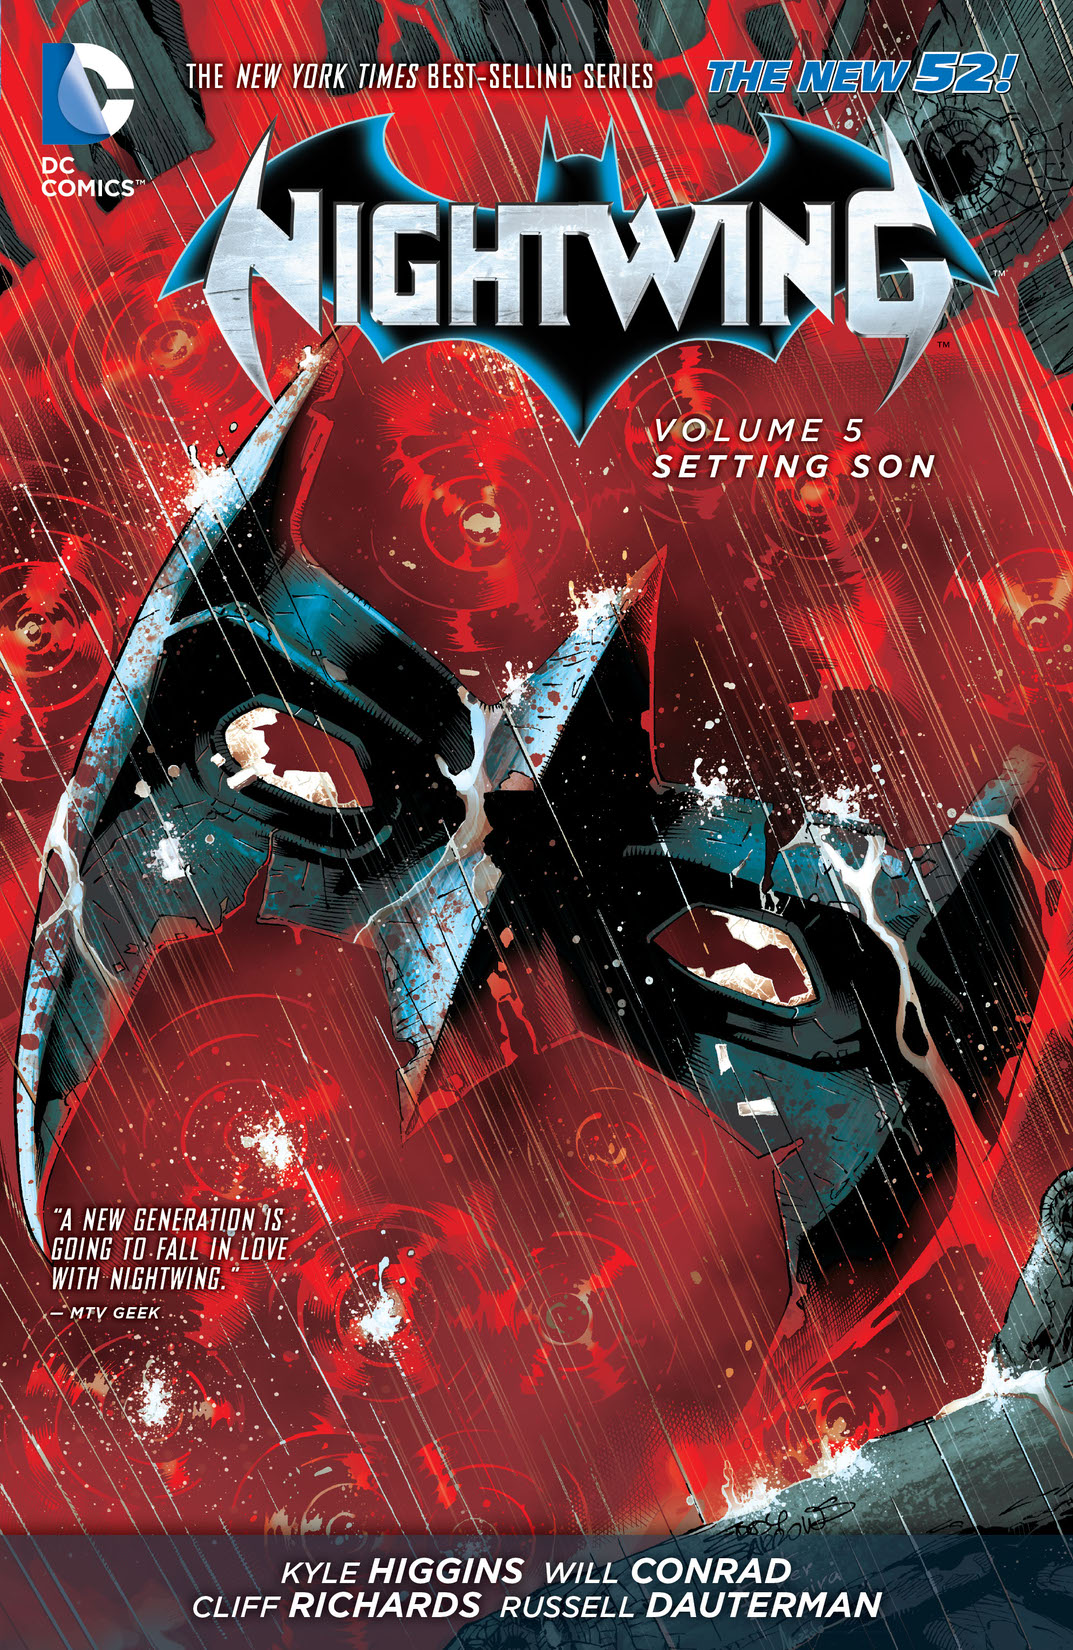 Nightwing Vol. 5: Setting Son preview images